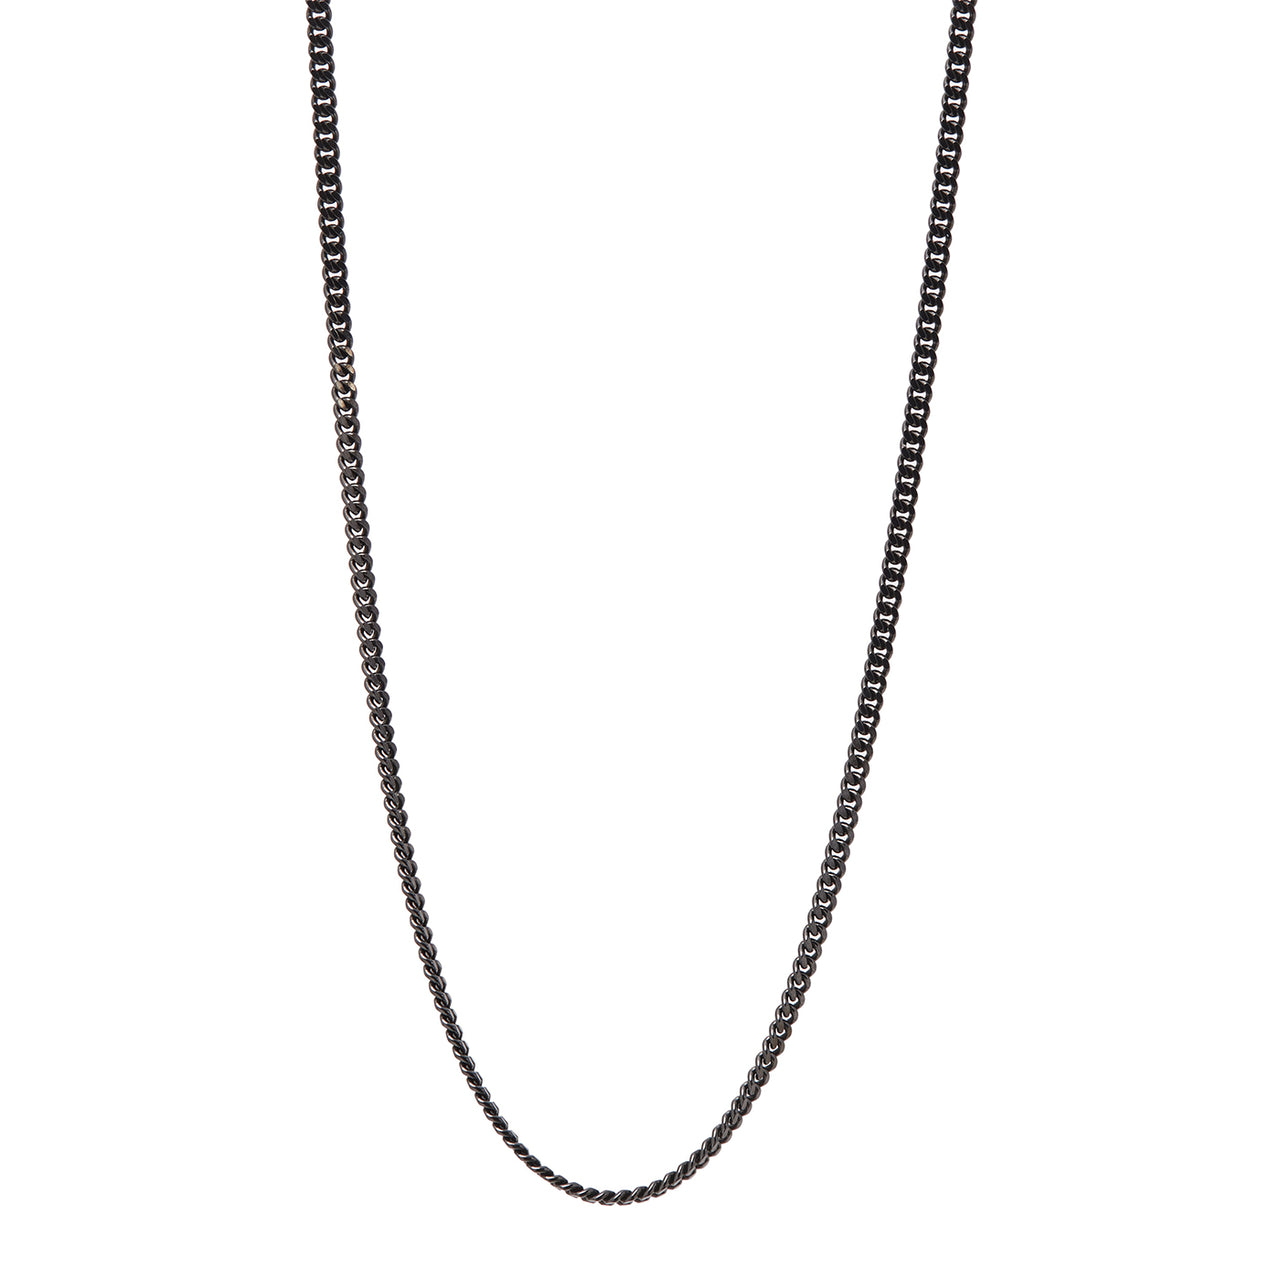 Gold & Black Finish Chain Necklace